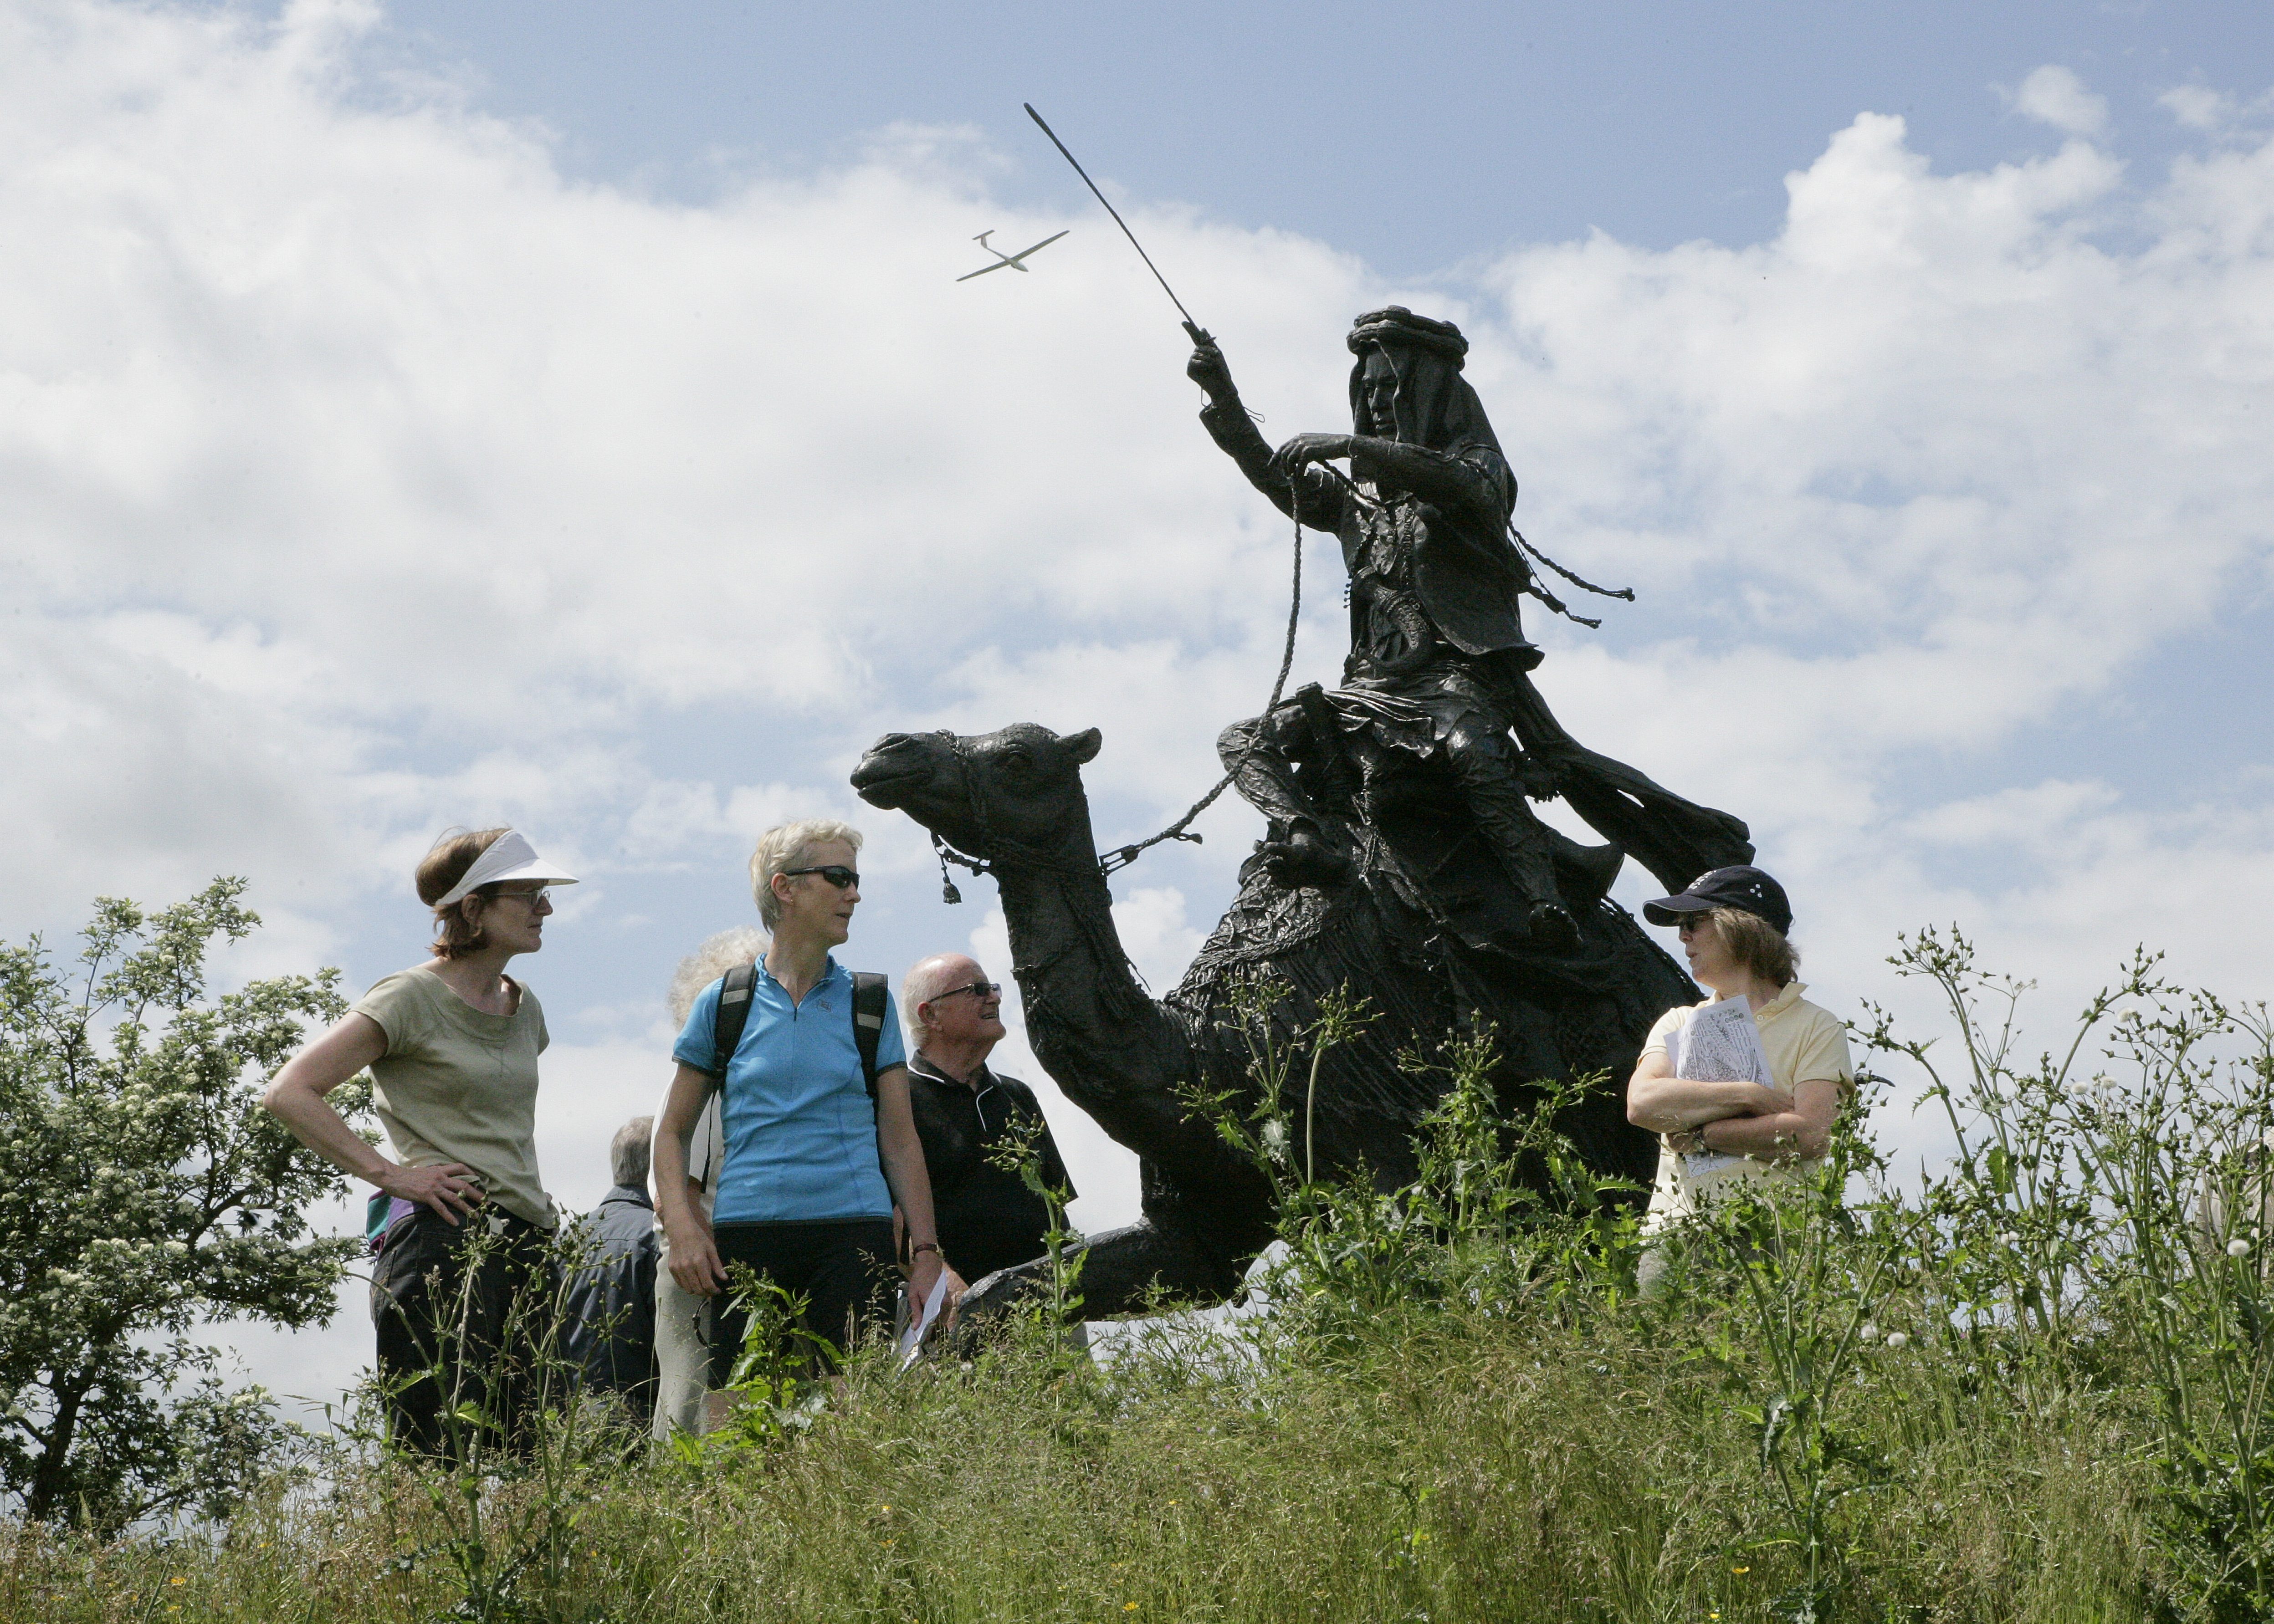 Visitors admiring the sculpture of Lawrence of Arabia